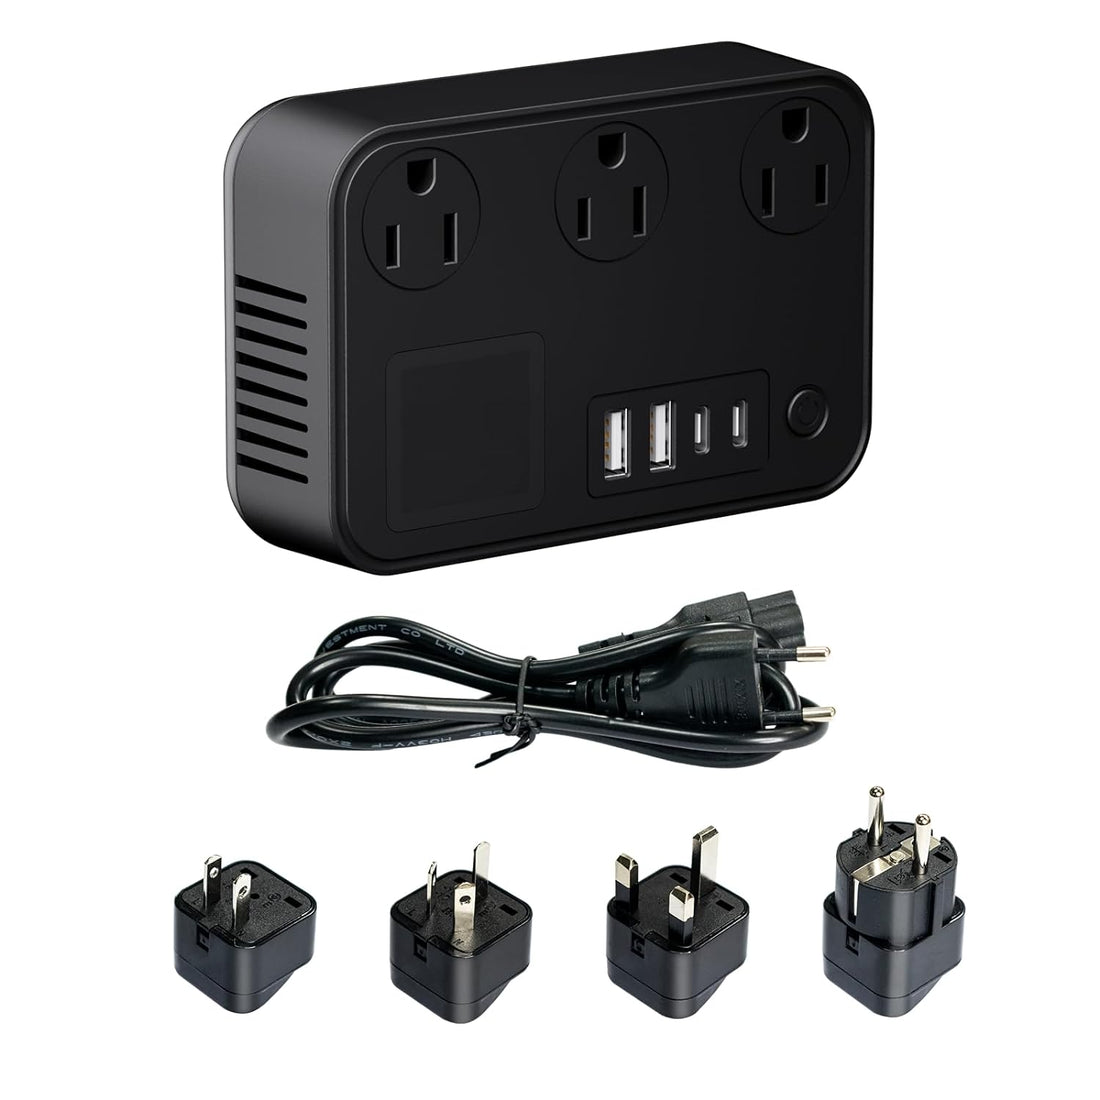 220v to 110v Converter with 2 Type-C 2 USB Charging 3 AC Ports 300W Travel Power Converter Adapter Combo Voltage Converter US to Europe UK AU Asia 150+ Countries Universal Travel Adapter F/E,C,G,I,A P